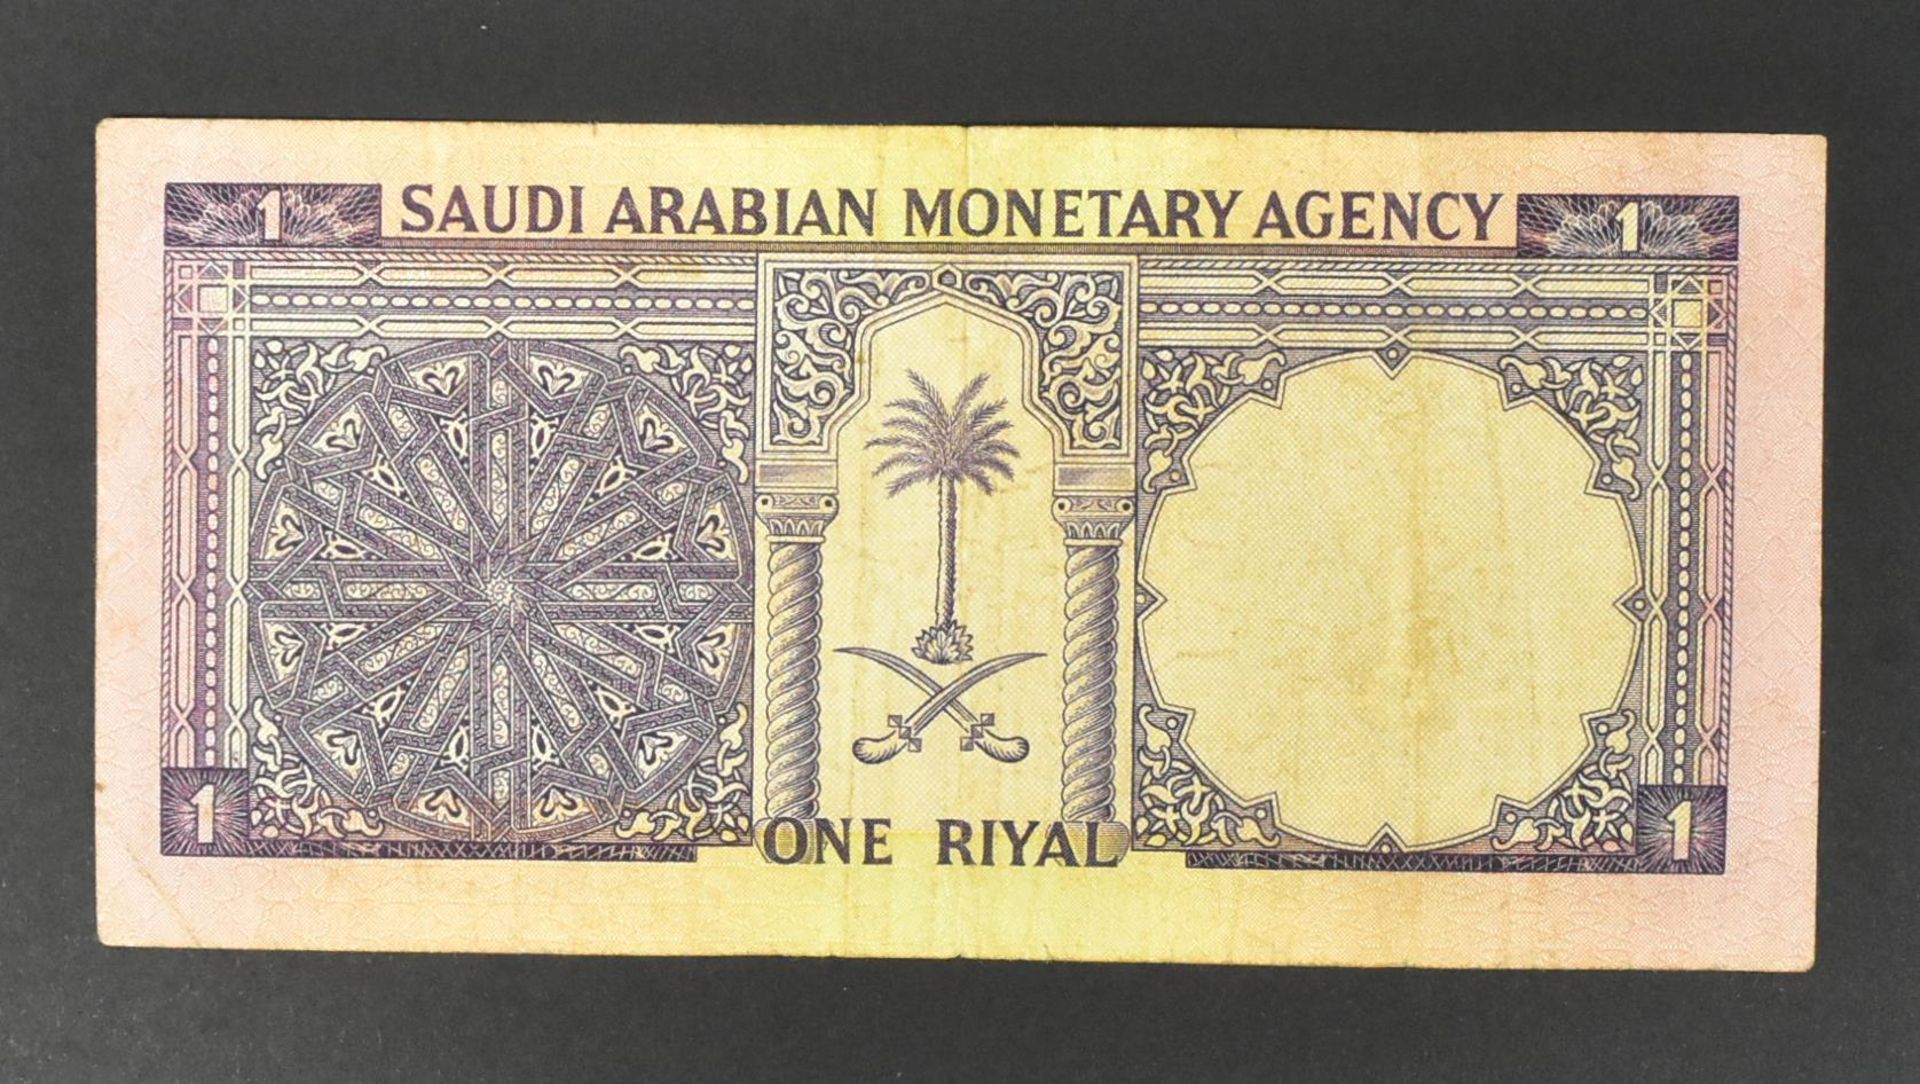 COLLECTION OF INTERNATIONAL UNCIRCULATED BANK NOTES - OMAN - Image 18 of 51